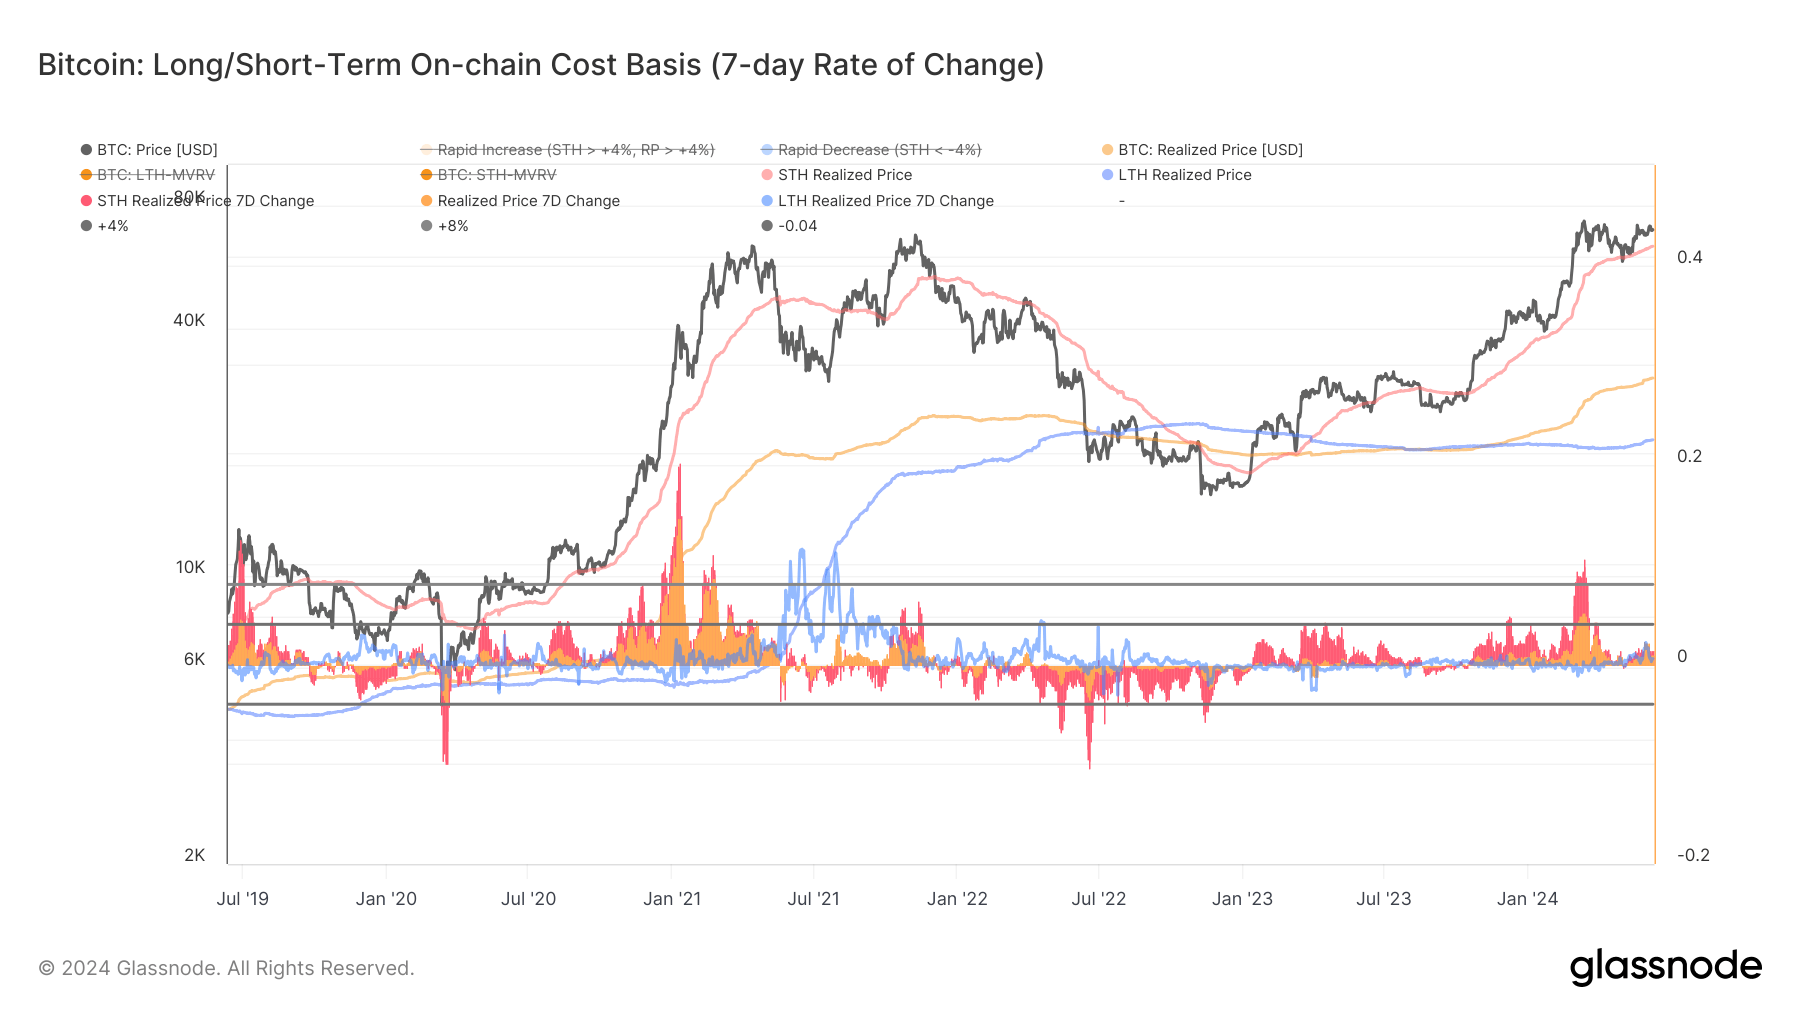  Long/Short-Term On- Chain Cost Basis: (Source: Glassnode)